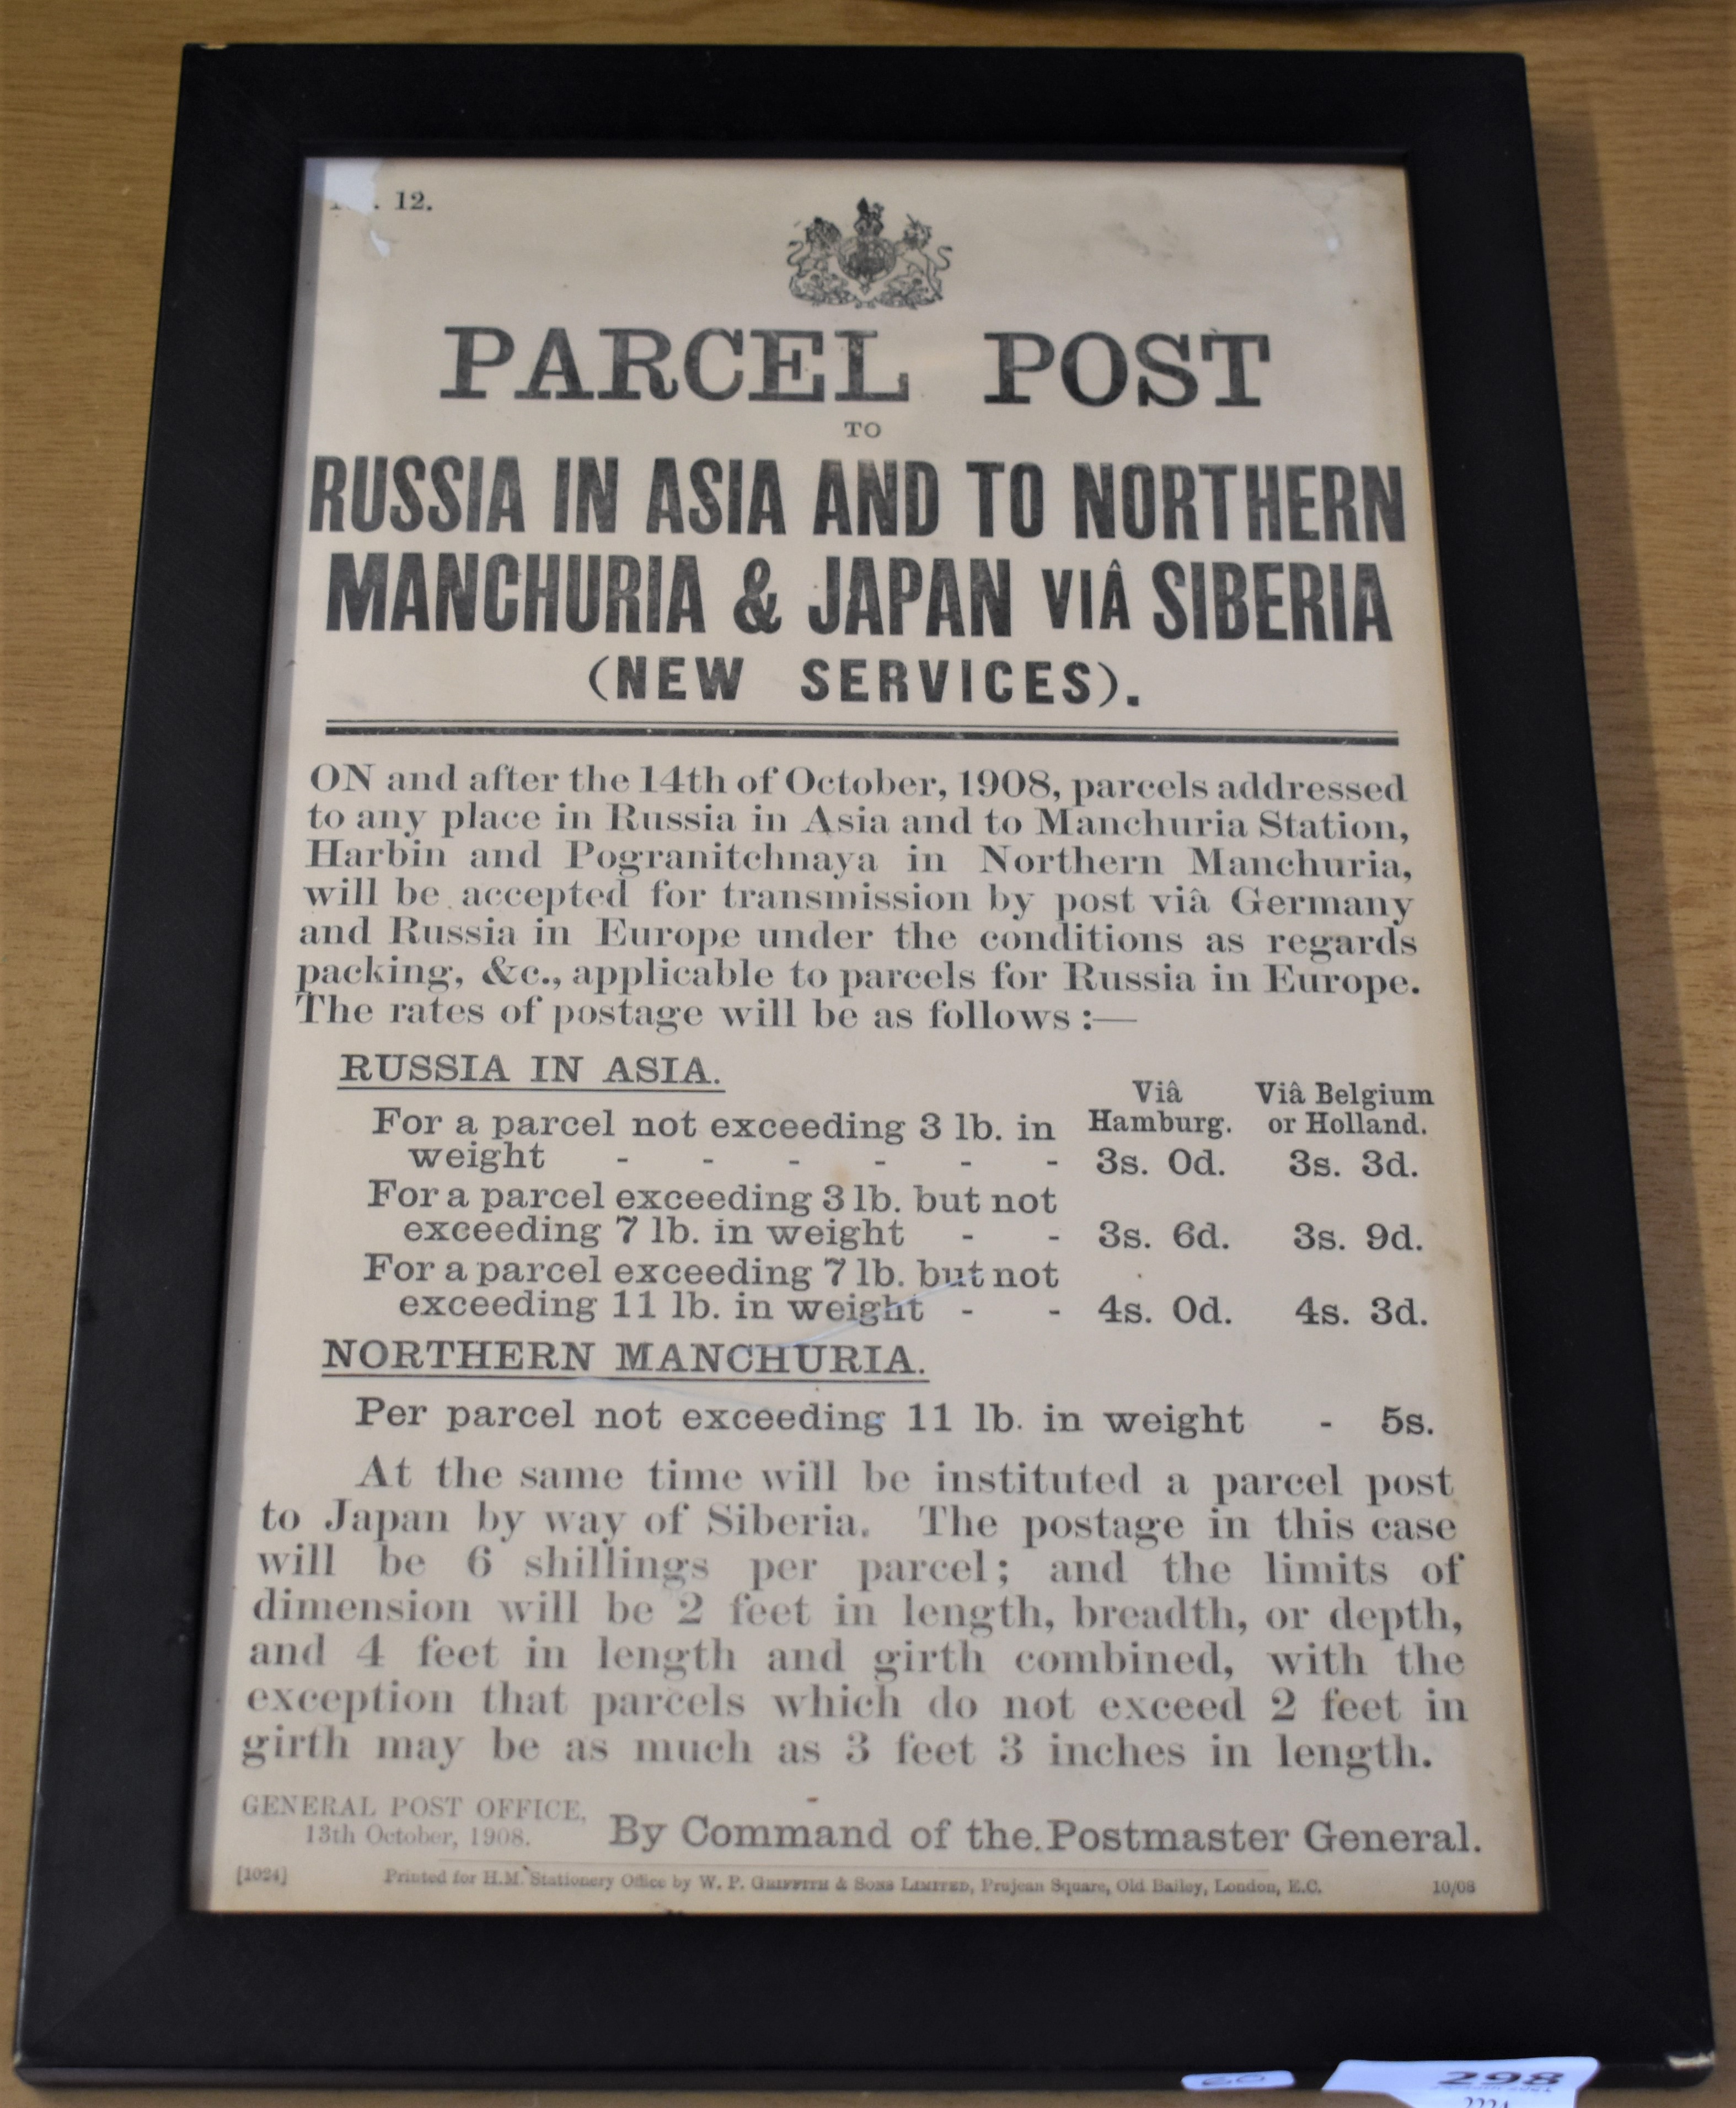 Russia Parcel Post to Russia in Asia and to Northern Manchuria & Japan via Siberia, 1908 General